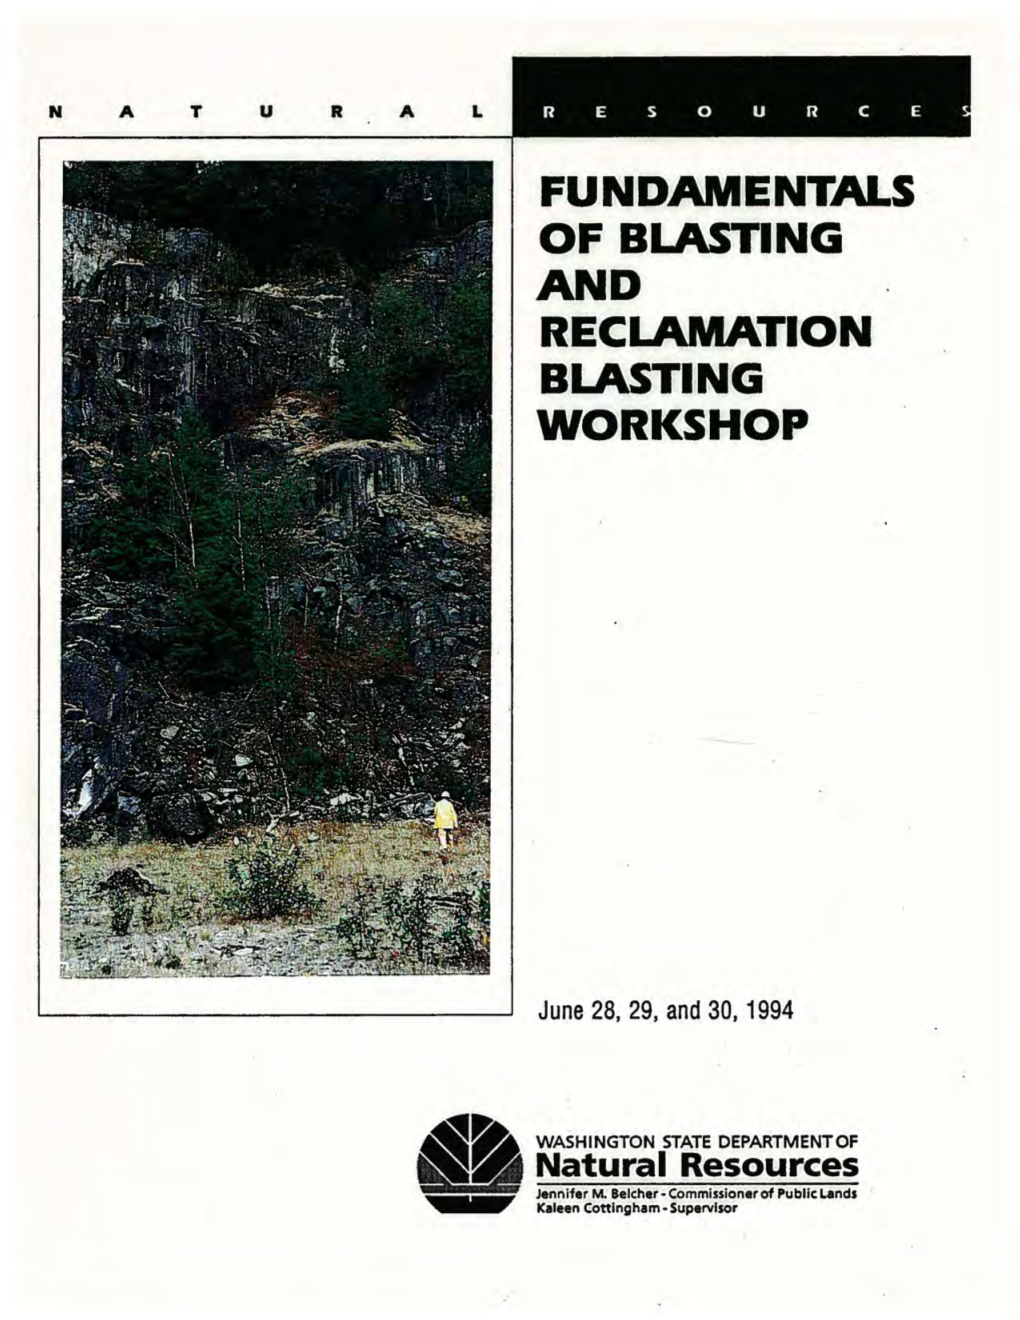 Fundamentals of Blasting and Reclamation Workshop